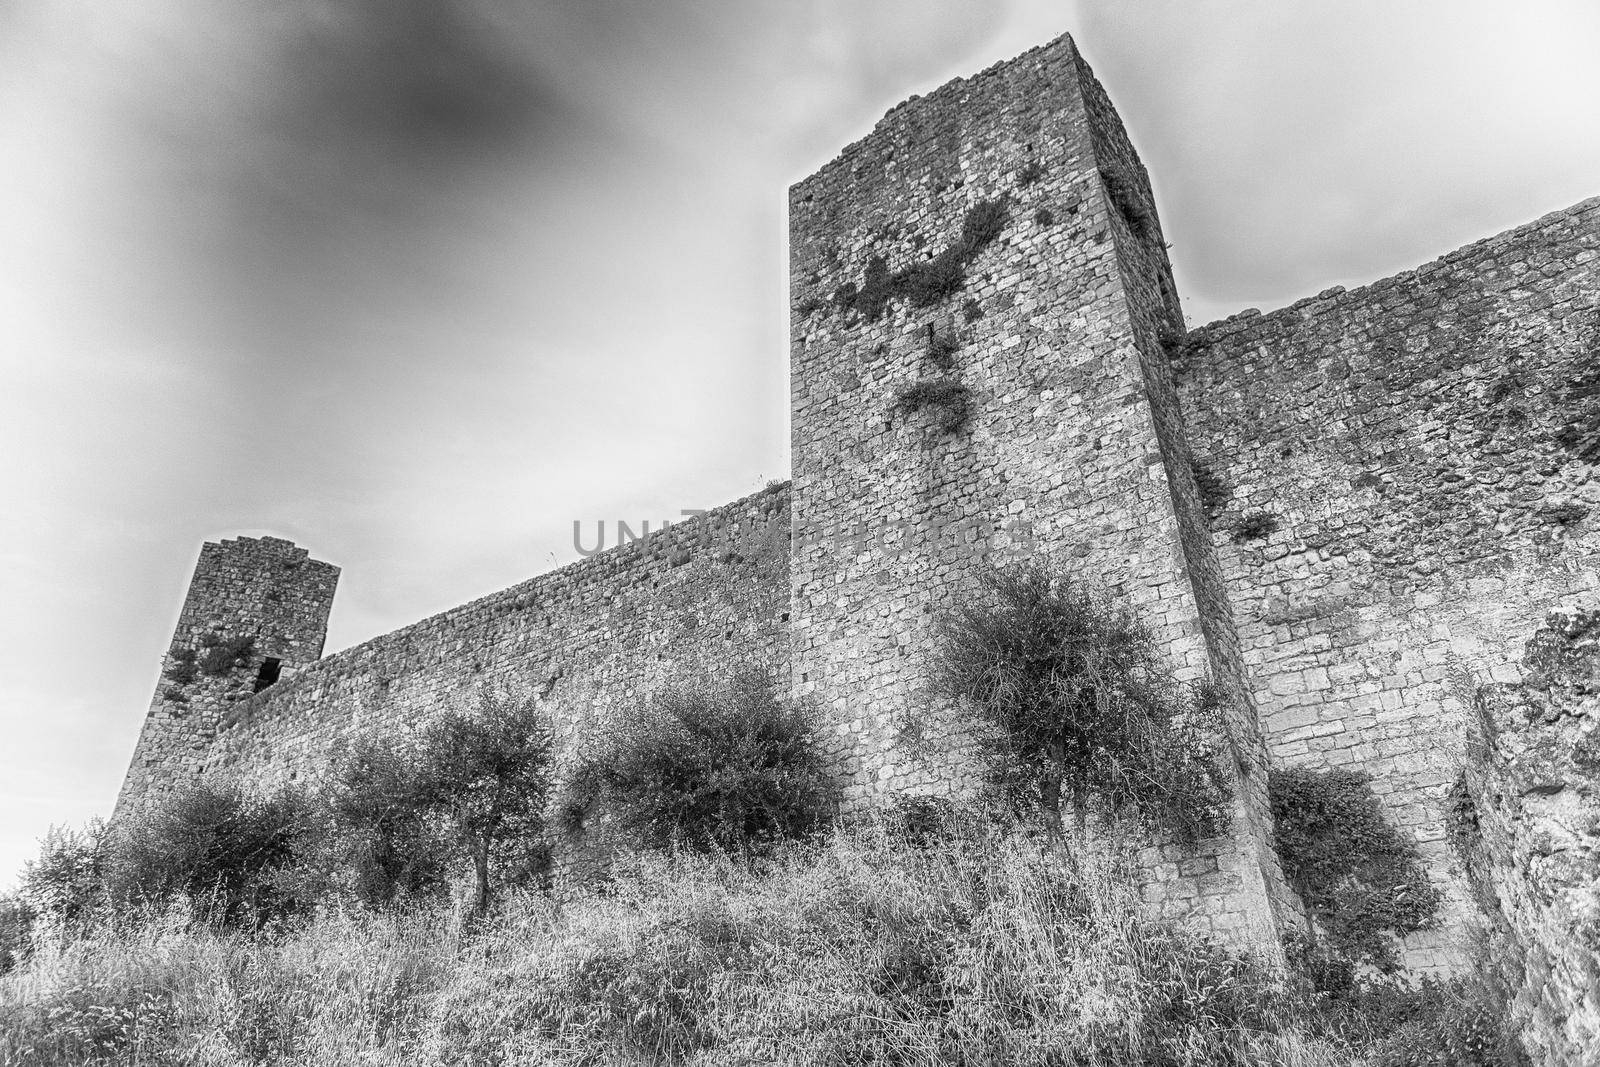 Medieval fortified city walls of the town of Monteriggioni, Italy by marcorubino